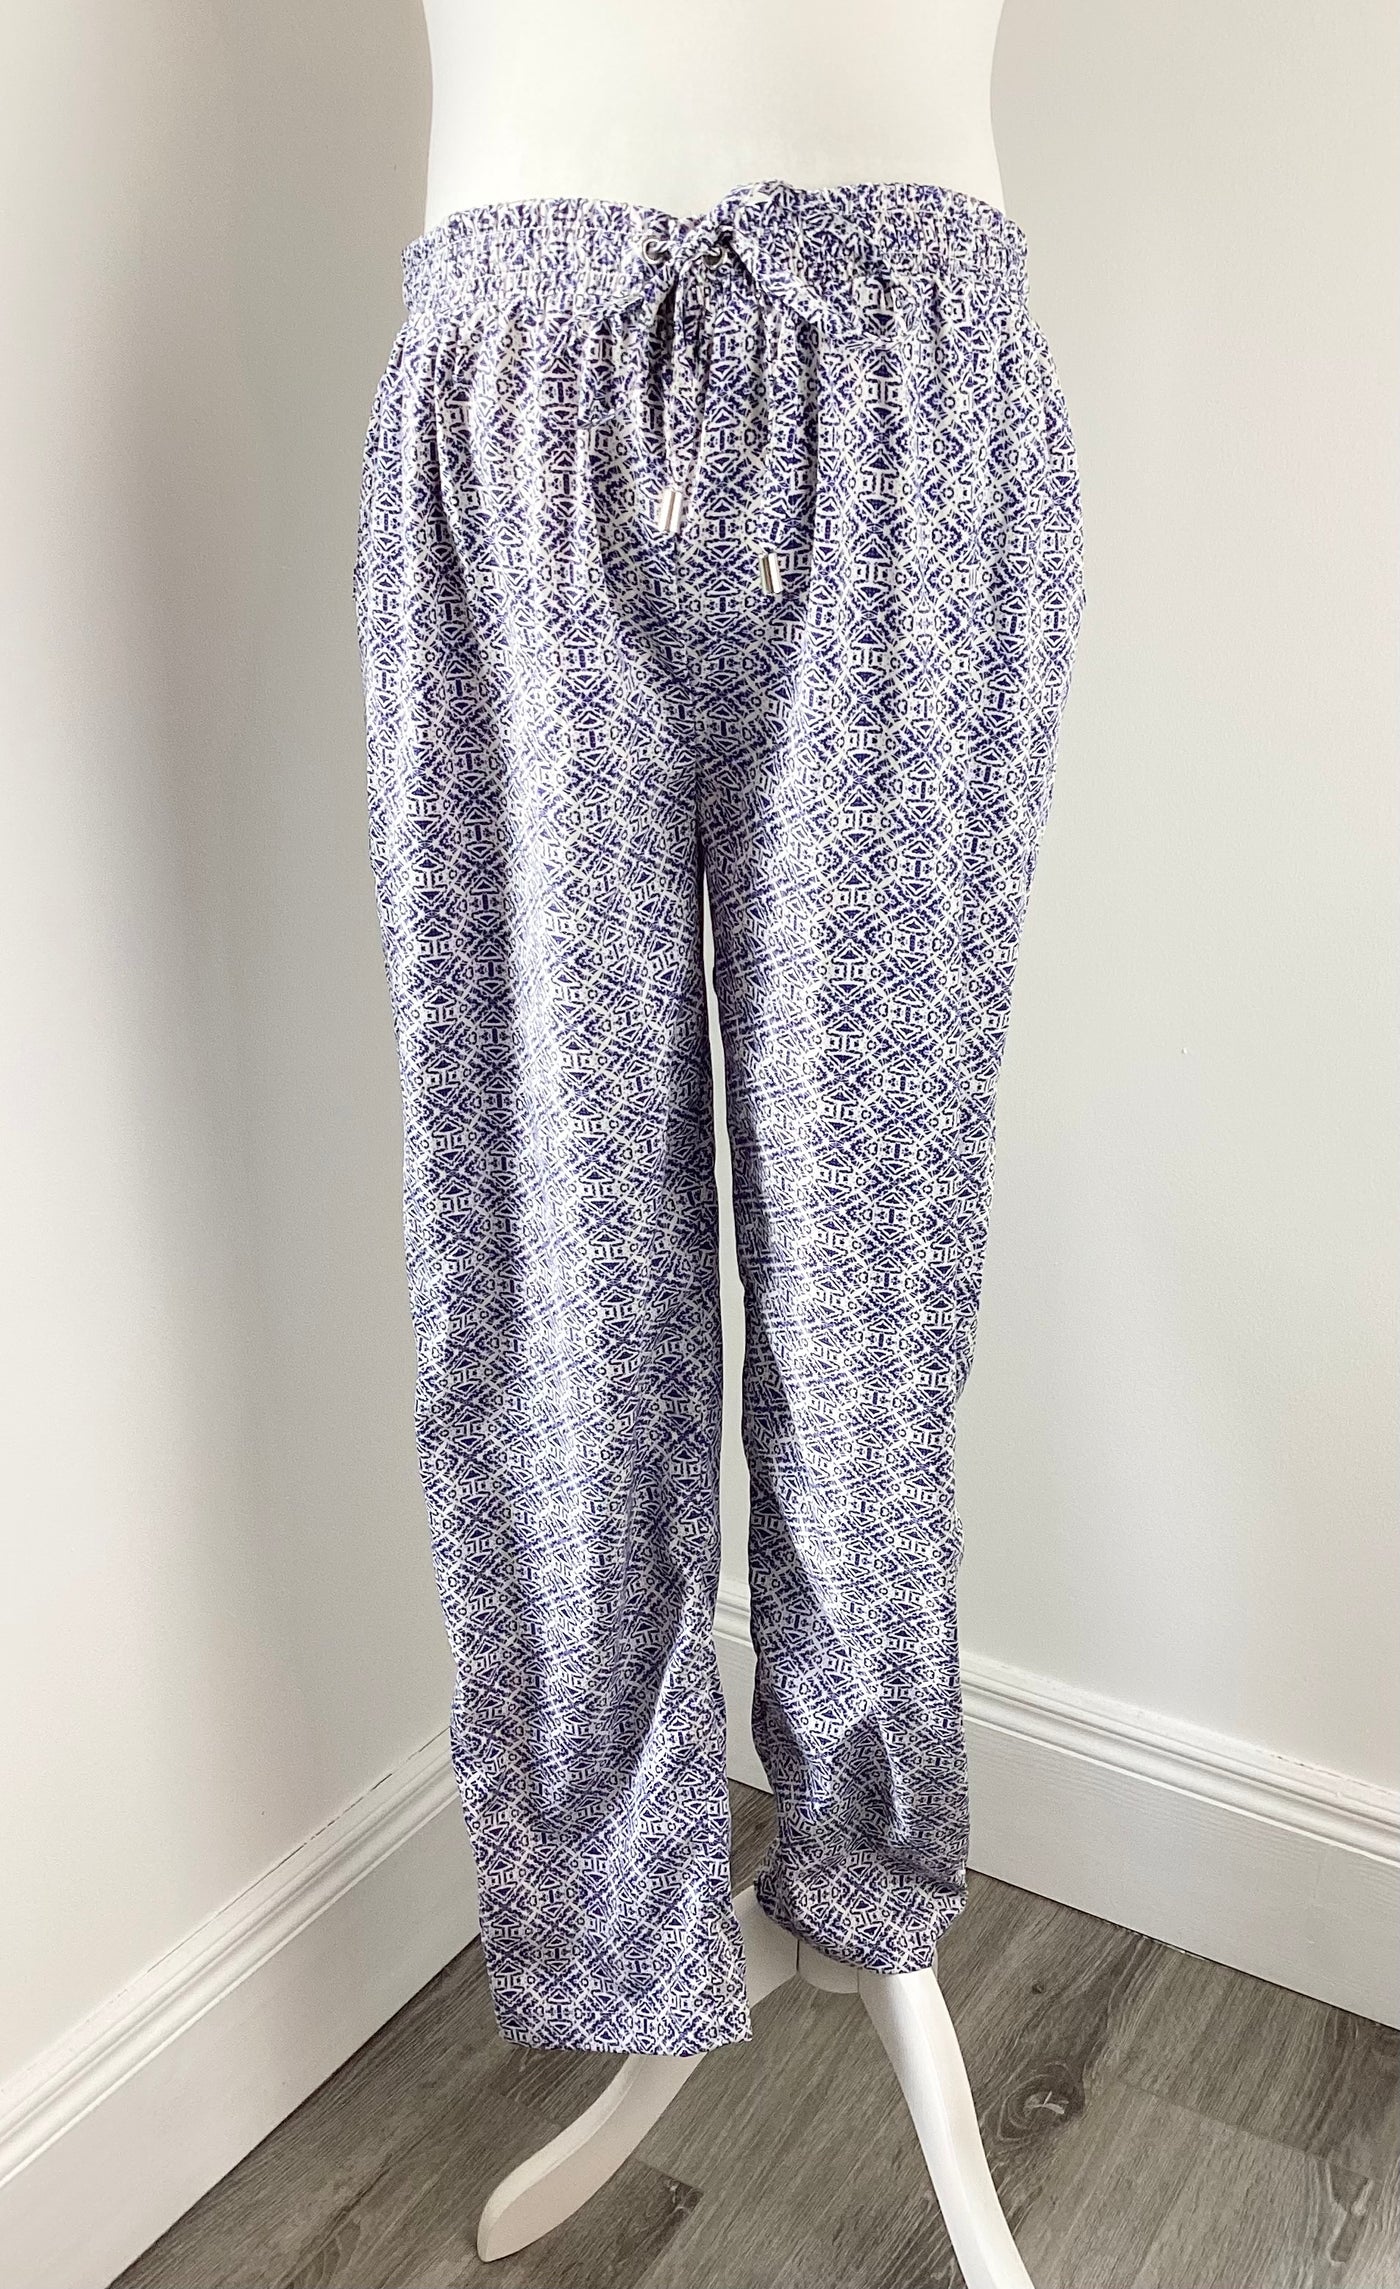 New Look Maternity blue & white Aztec print summer trousers - Size 16